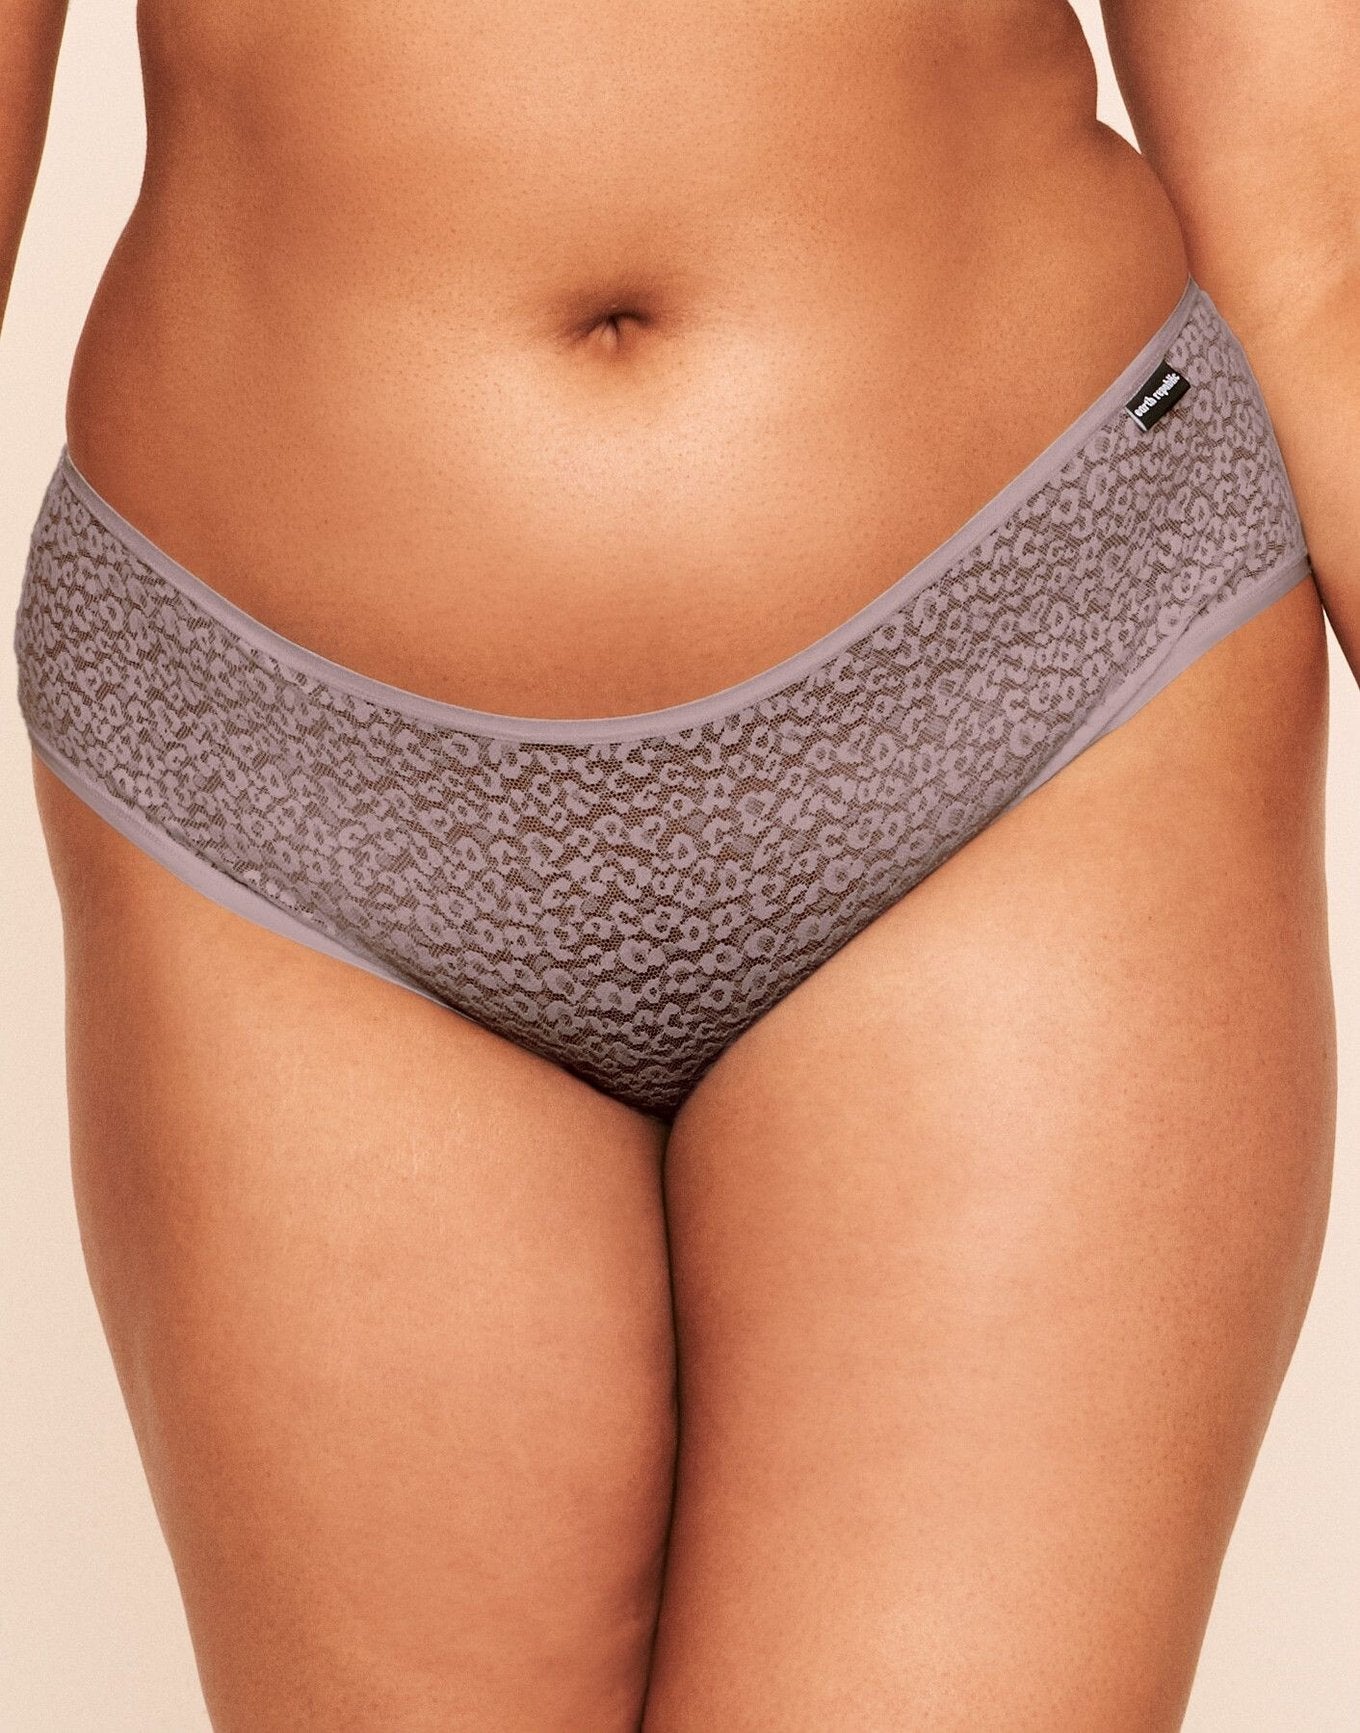 Earth Republic Billie Lace Lace Cheeky in color Deauville Mauve and shape cheeky